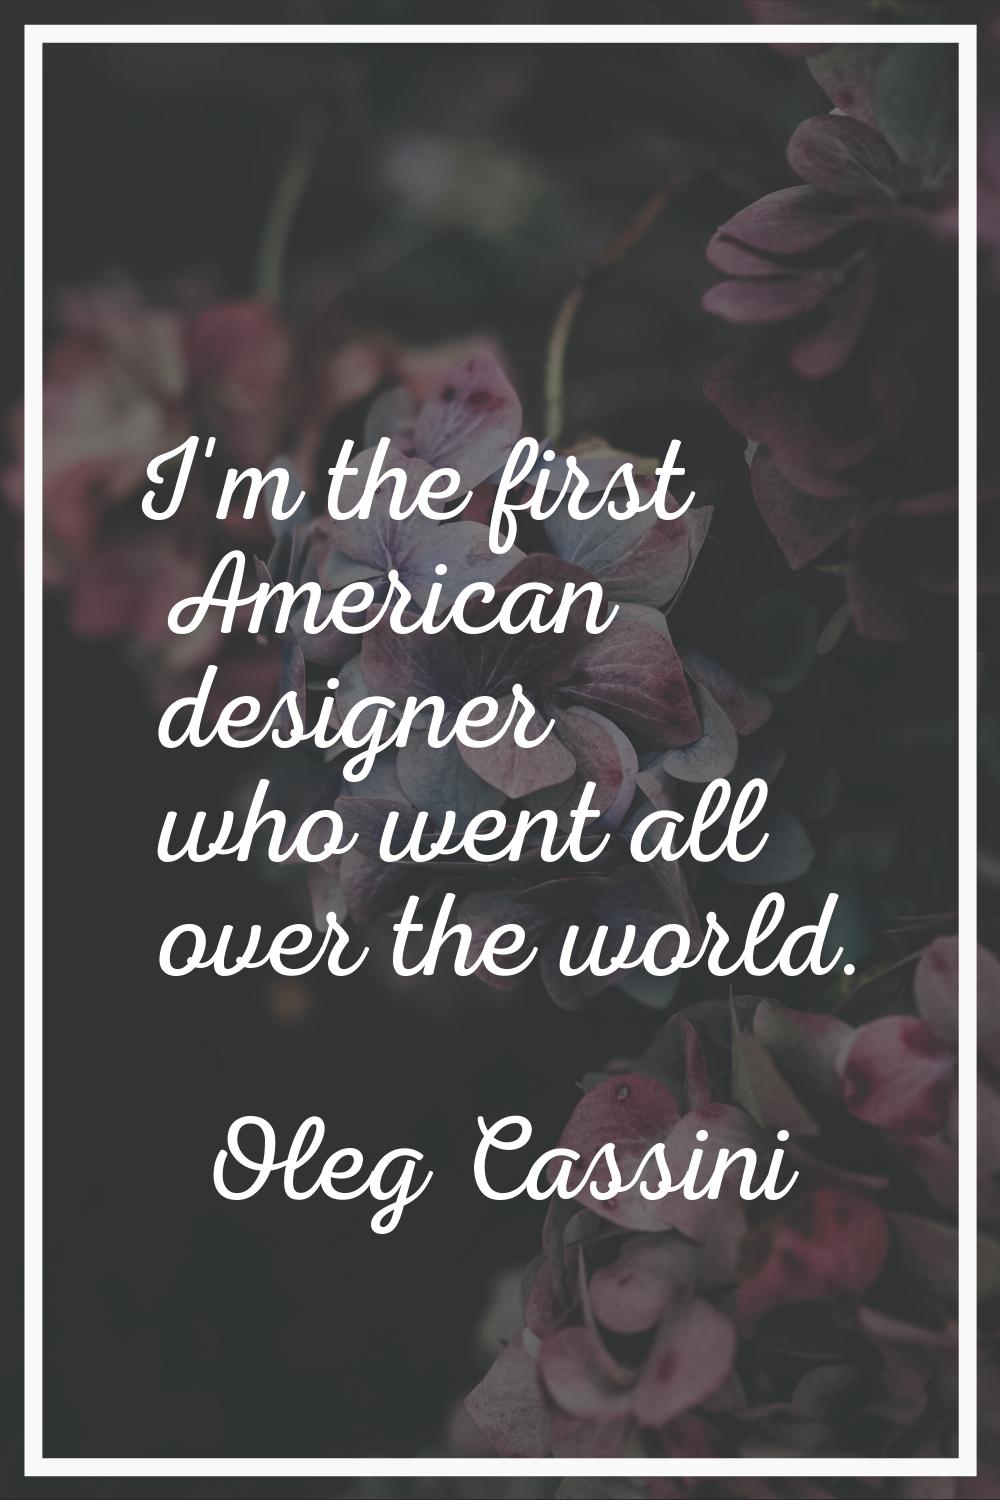 I'm the first American designer who went all over the world.